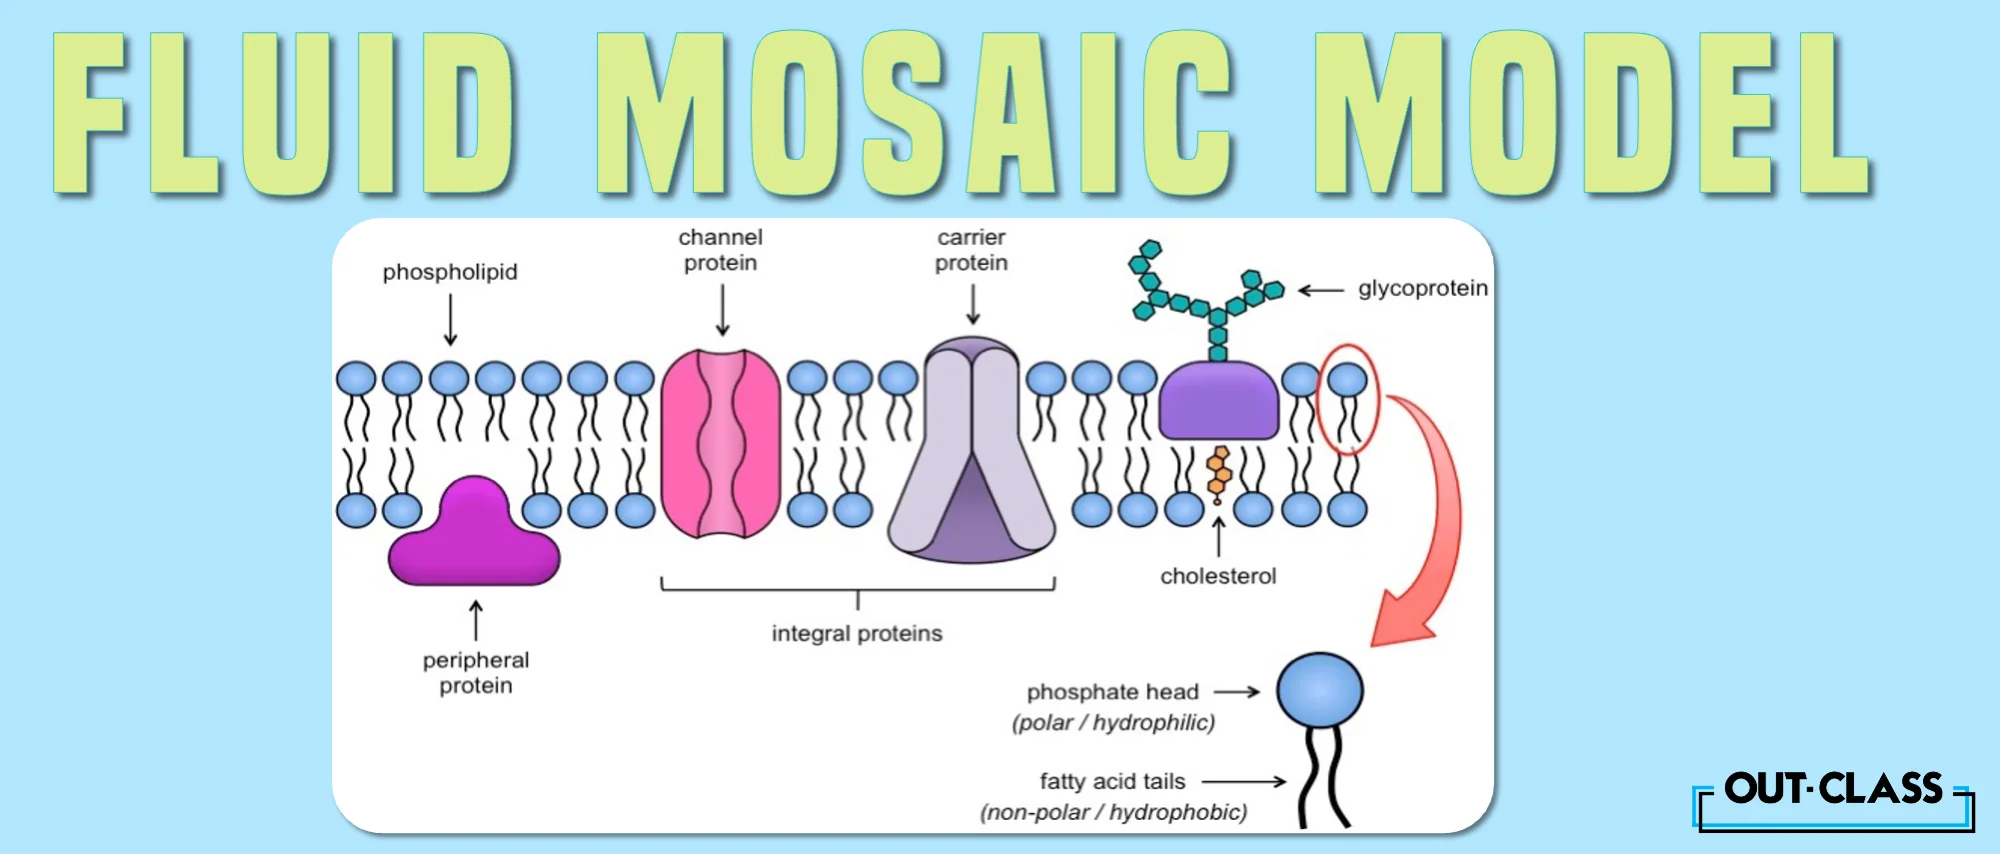 Fluid mosaic model is defined here as the fluid mosaic model of the cell membrane. It also explains why is it called the fluid mosaic model and why are fluid mosaic model important. It also covers the components and features of the fluid-mosaic membrane.